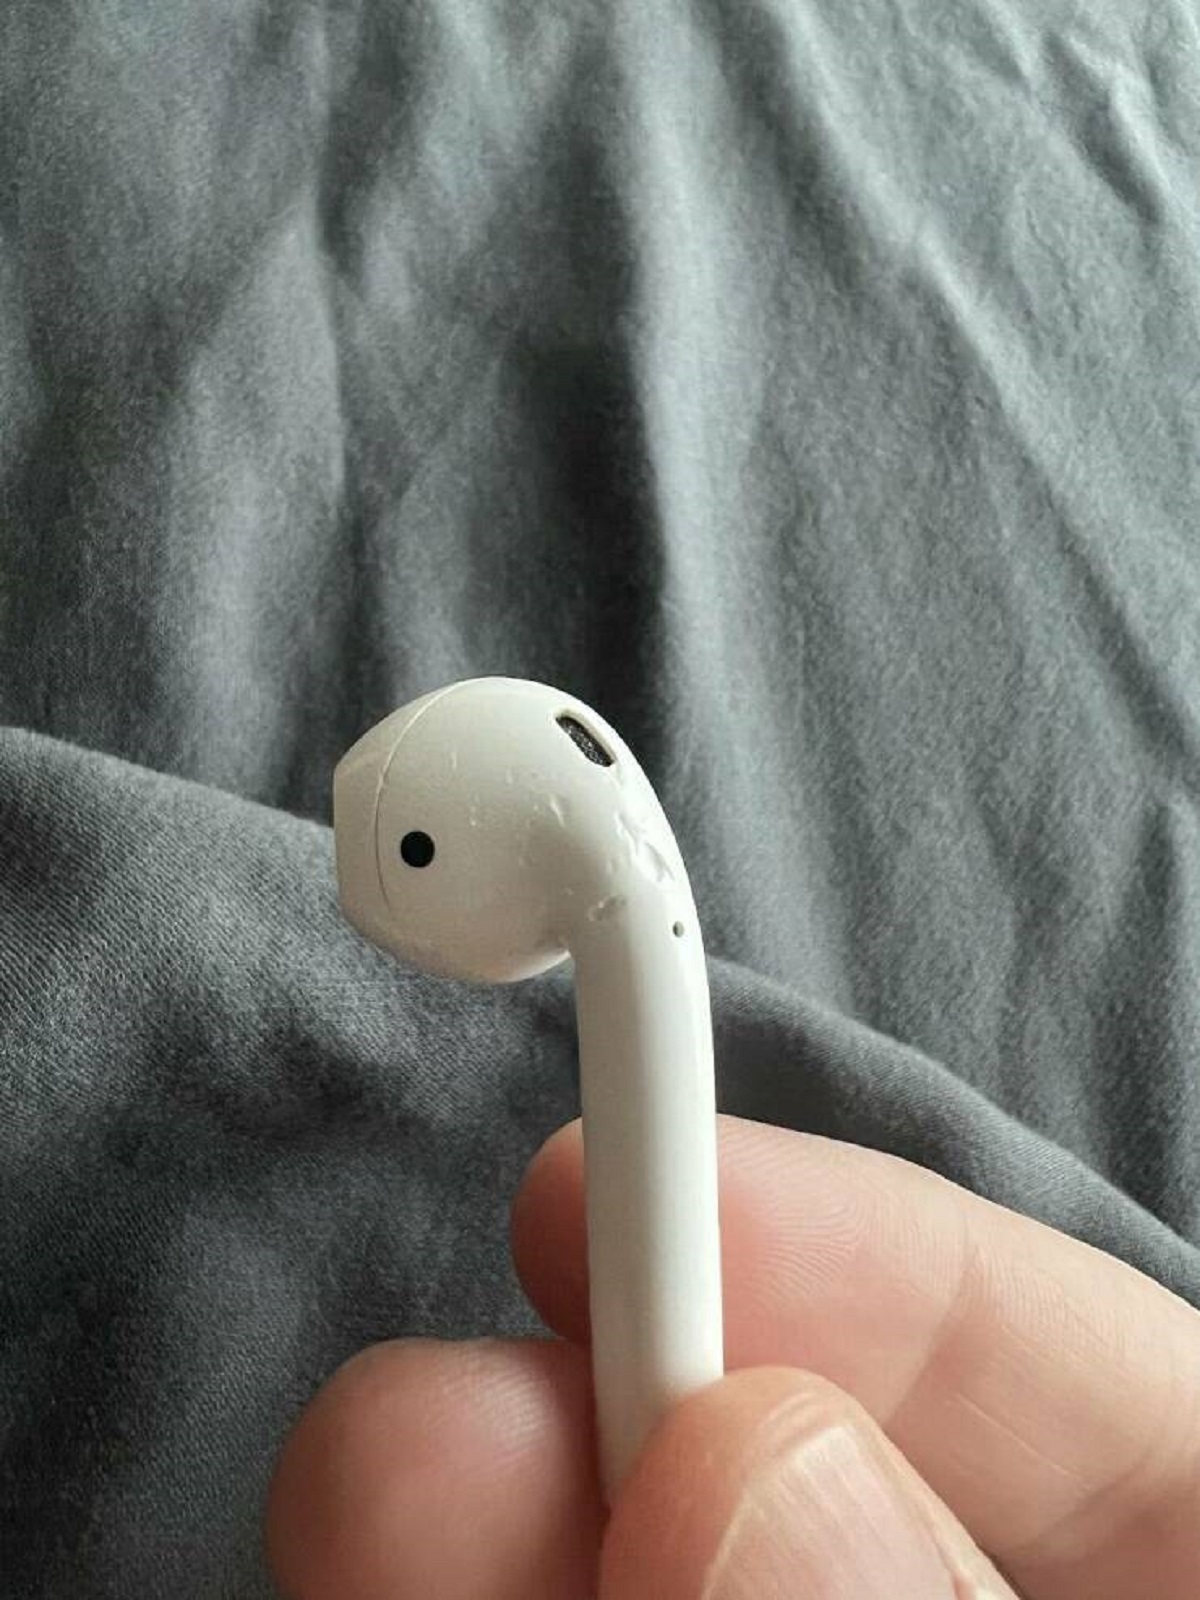 "My airpod somehow got in my mouth and I chewed on it in my sleep."